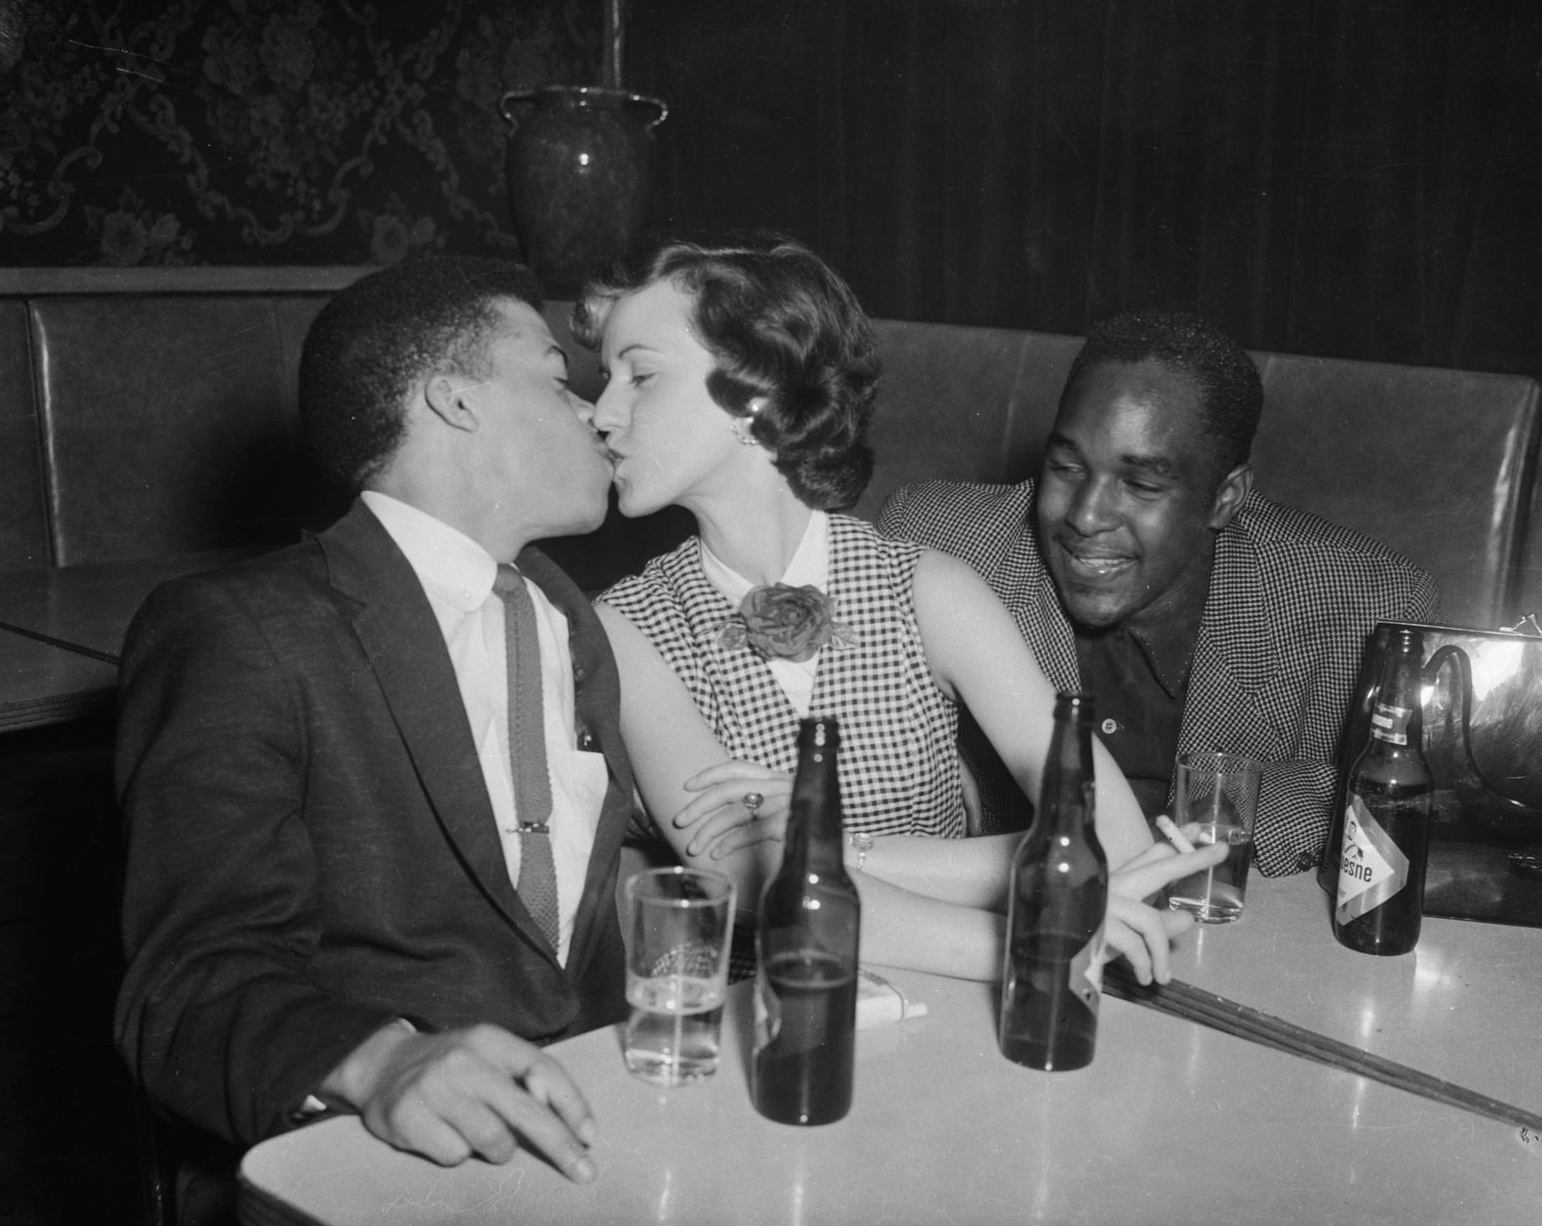 Man and woman kissing, with smiling man looking at them, behind table with bottles of Duquesne Beer, in bar or restaurant, ca. 1950–1965